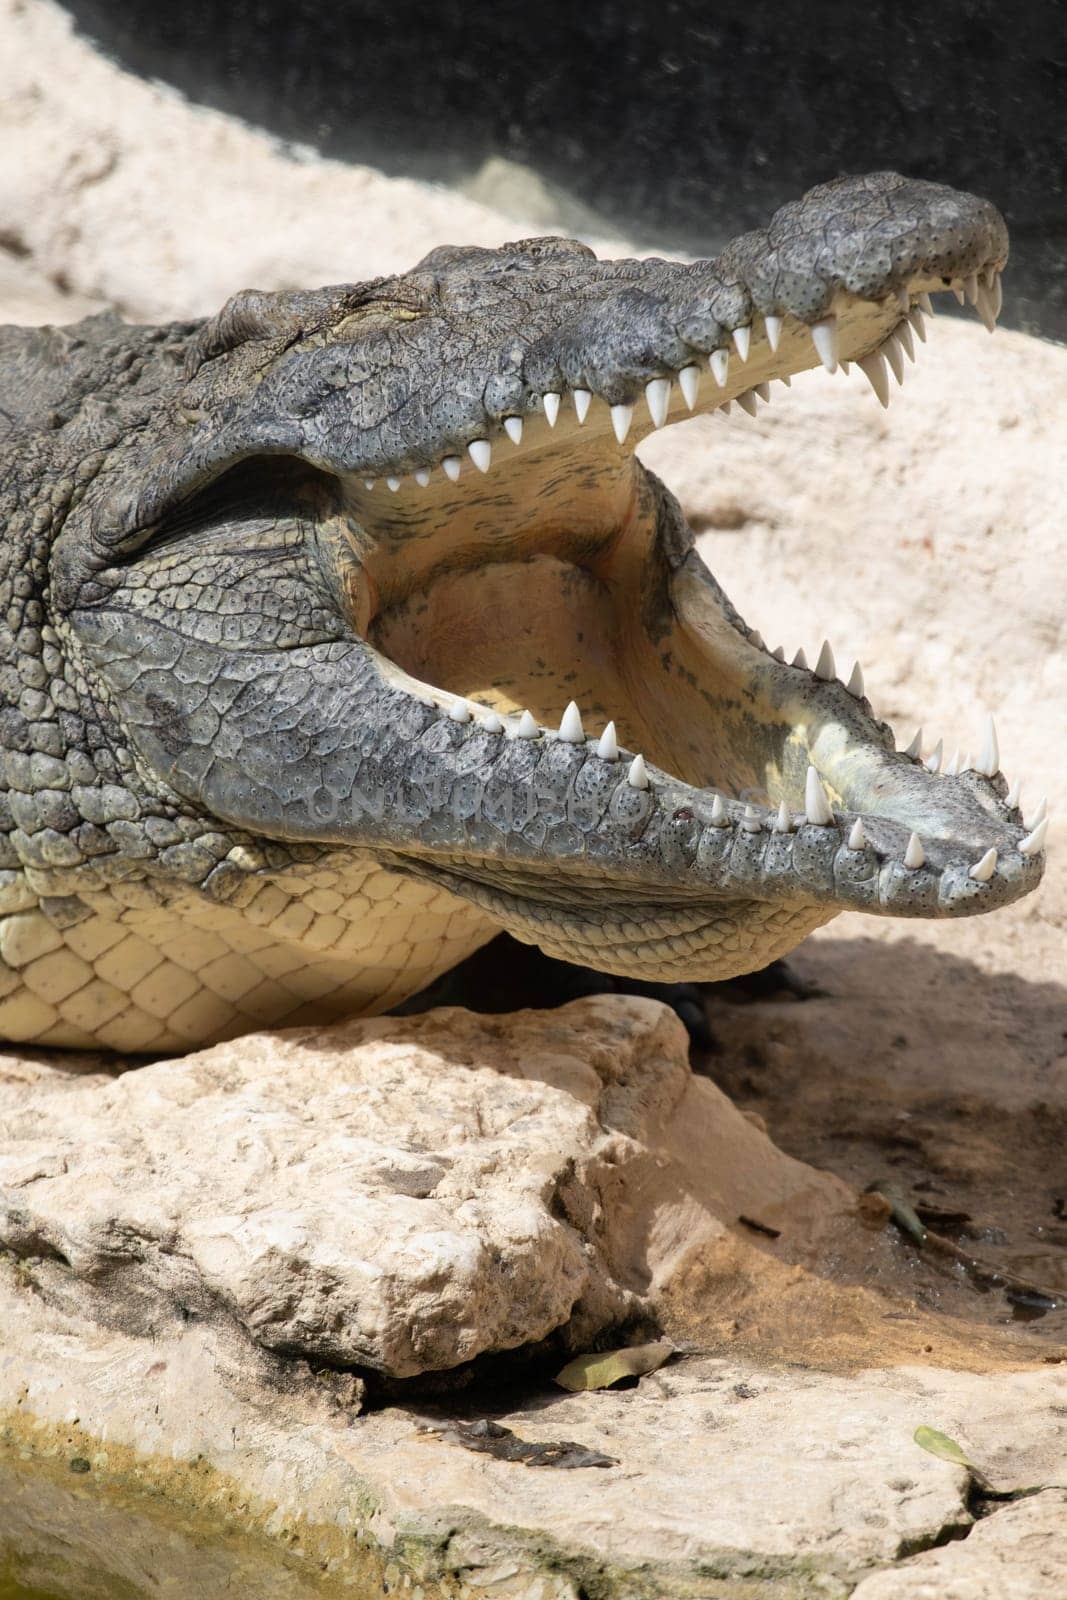 The crocodile opened its mouth in anticipation of prey. High quality photo